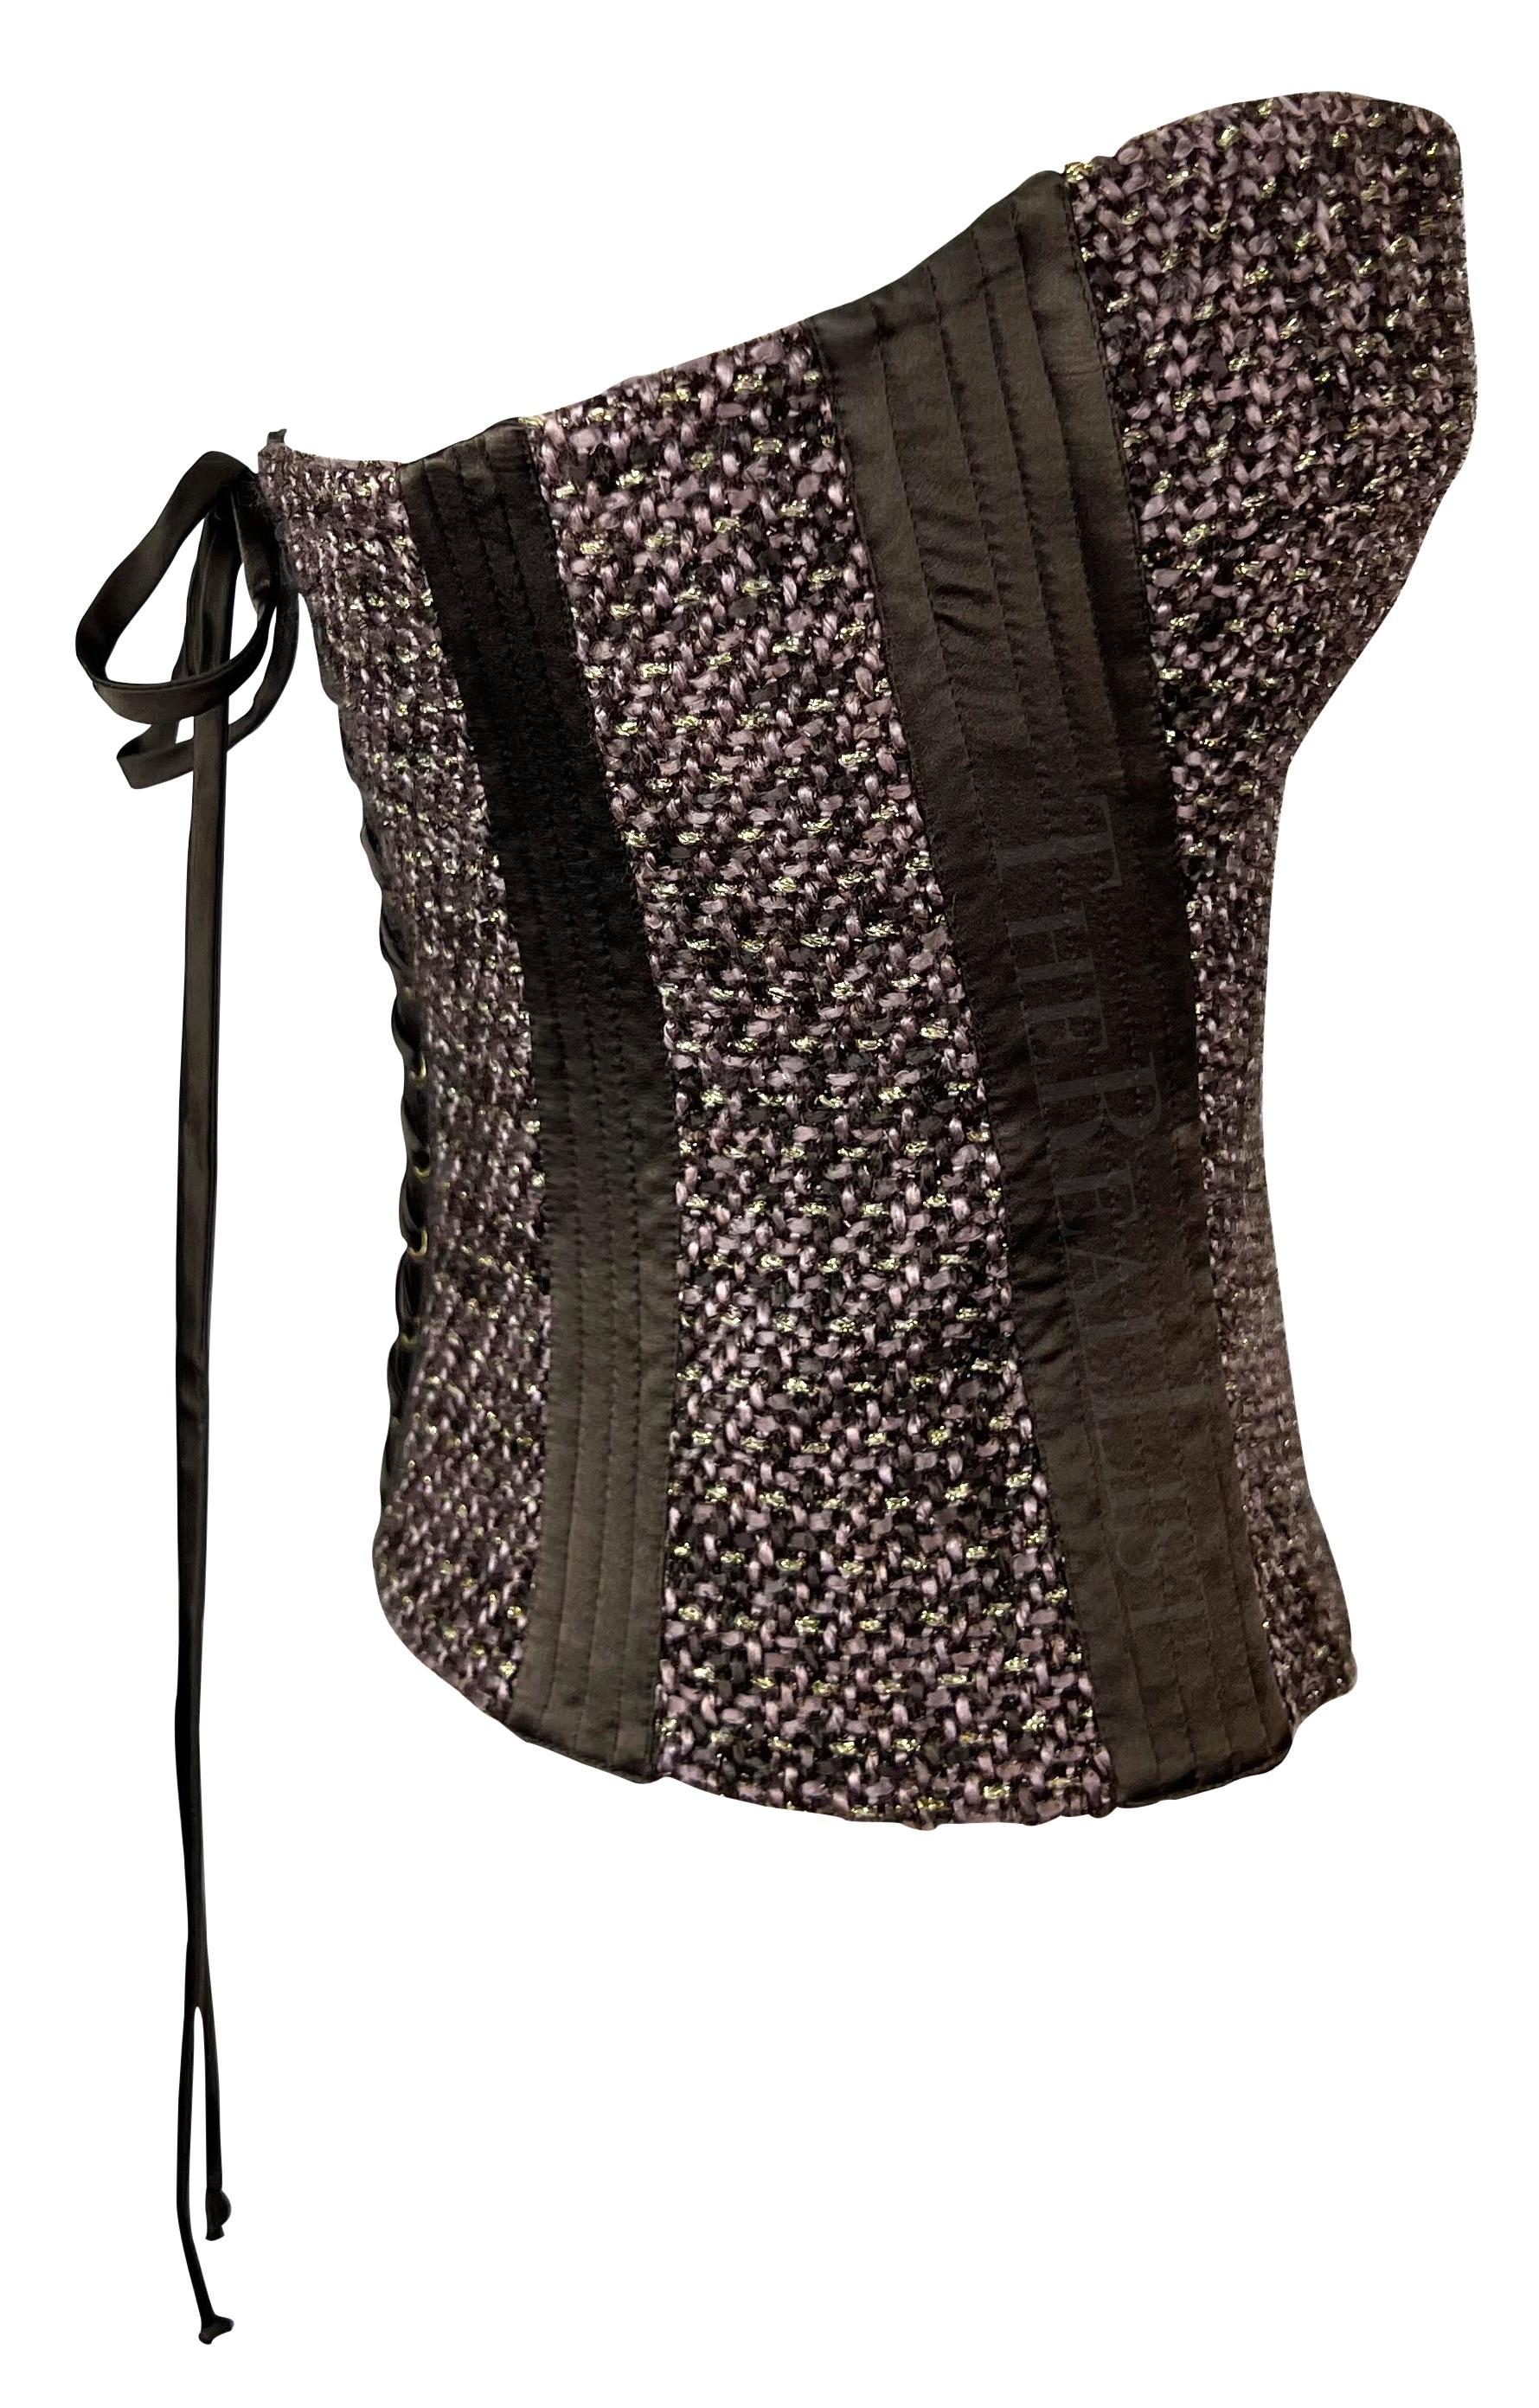 NWT F/W 2005 Roberto Cavalli Brown Tweed Strapless Corset Top In Excellent Condition For Sale In West Hollywood, CA